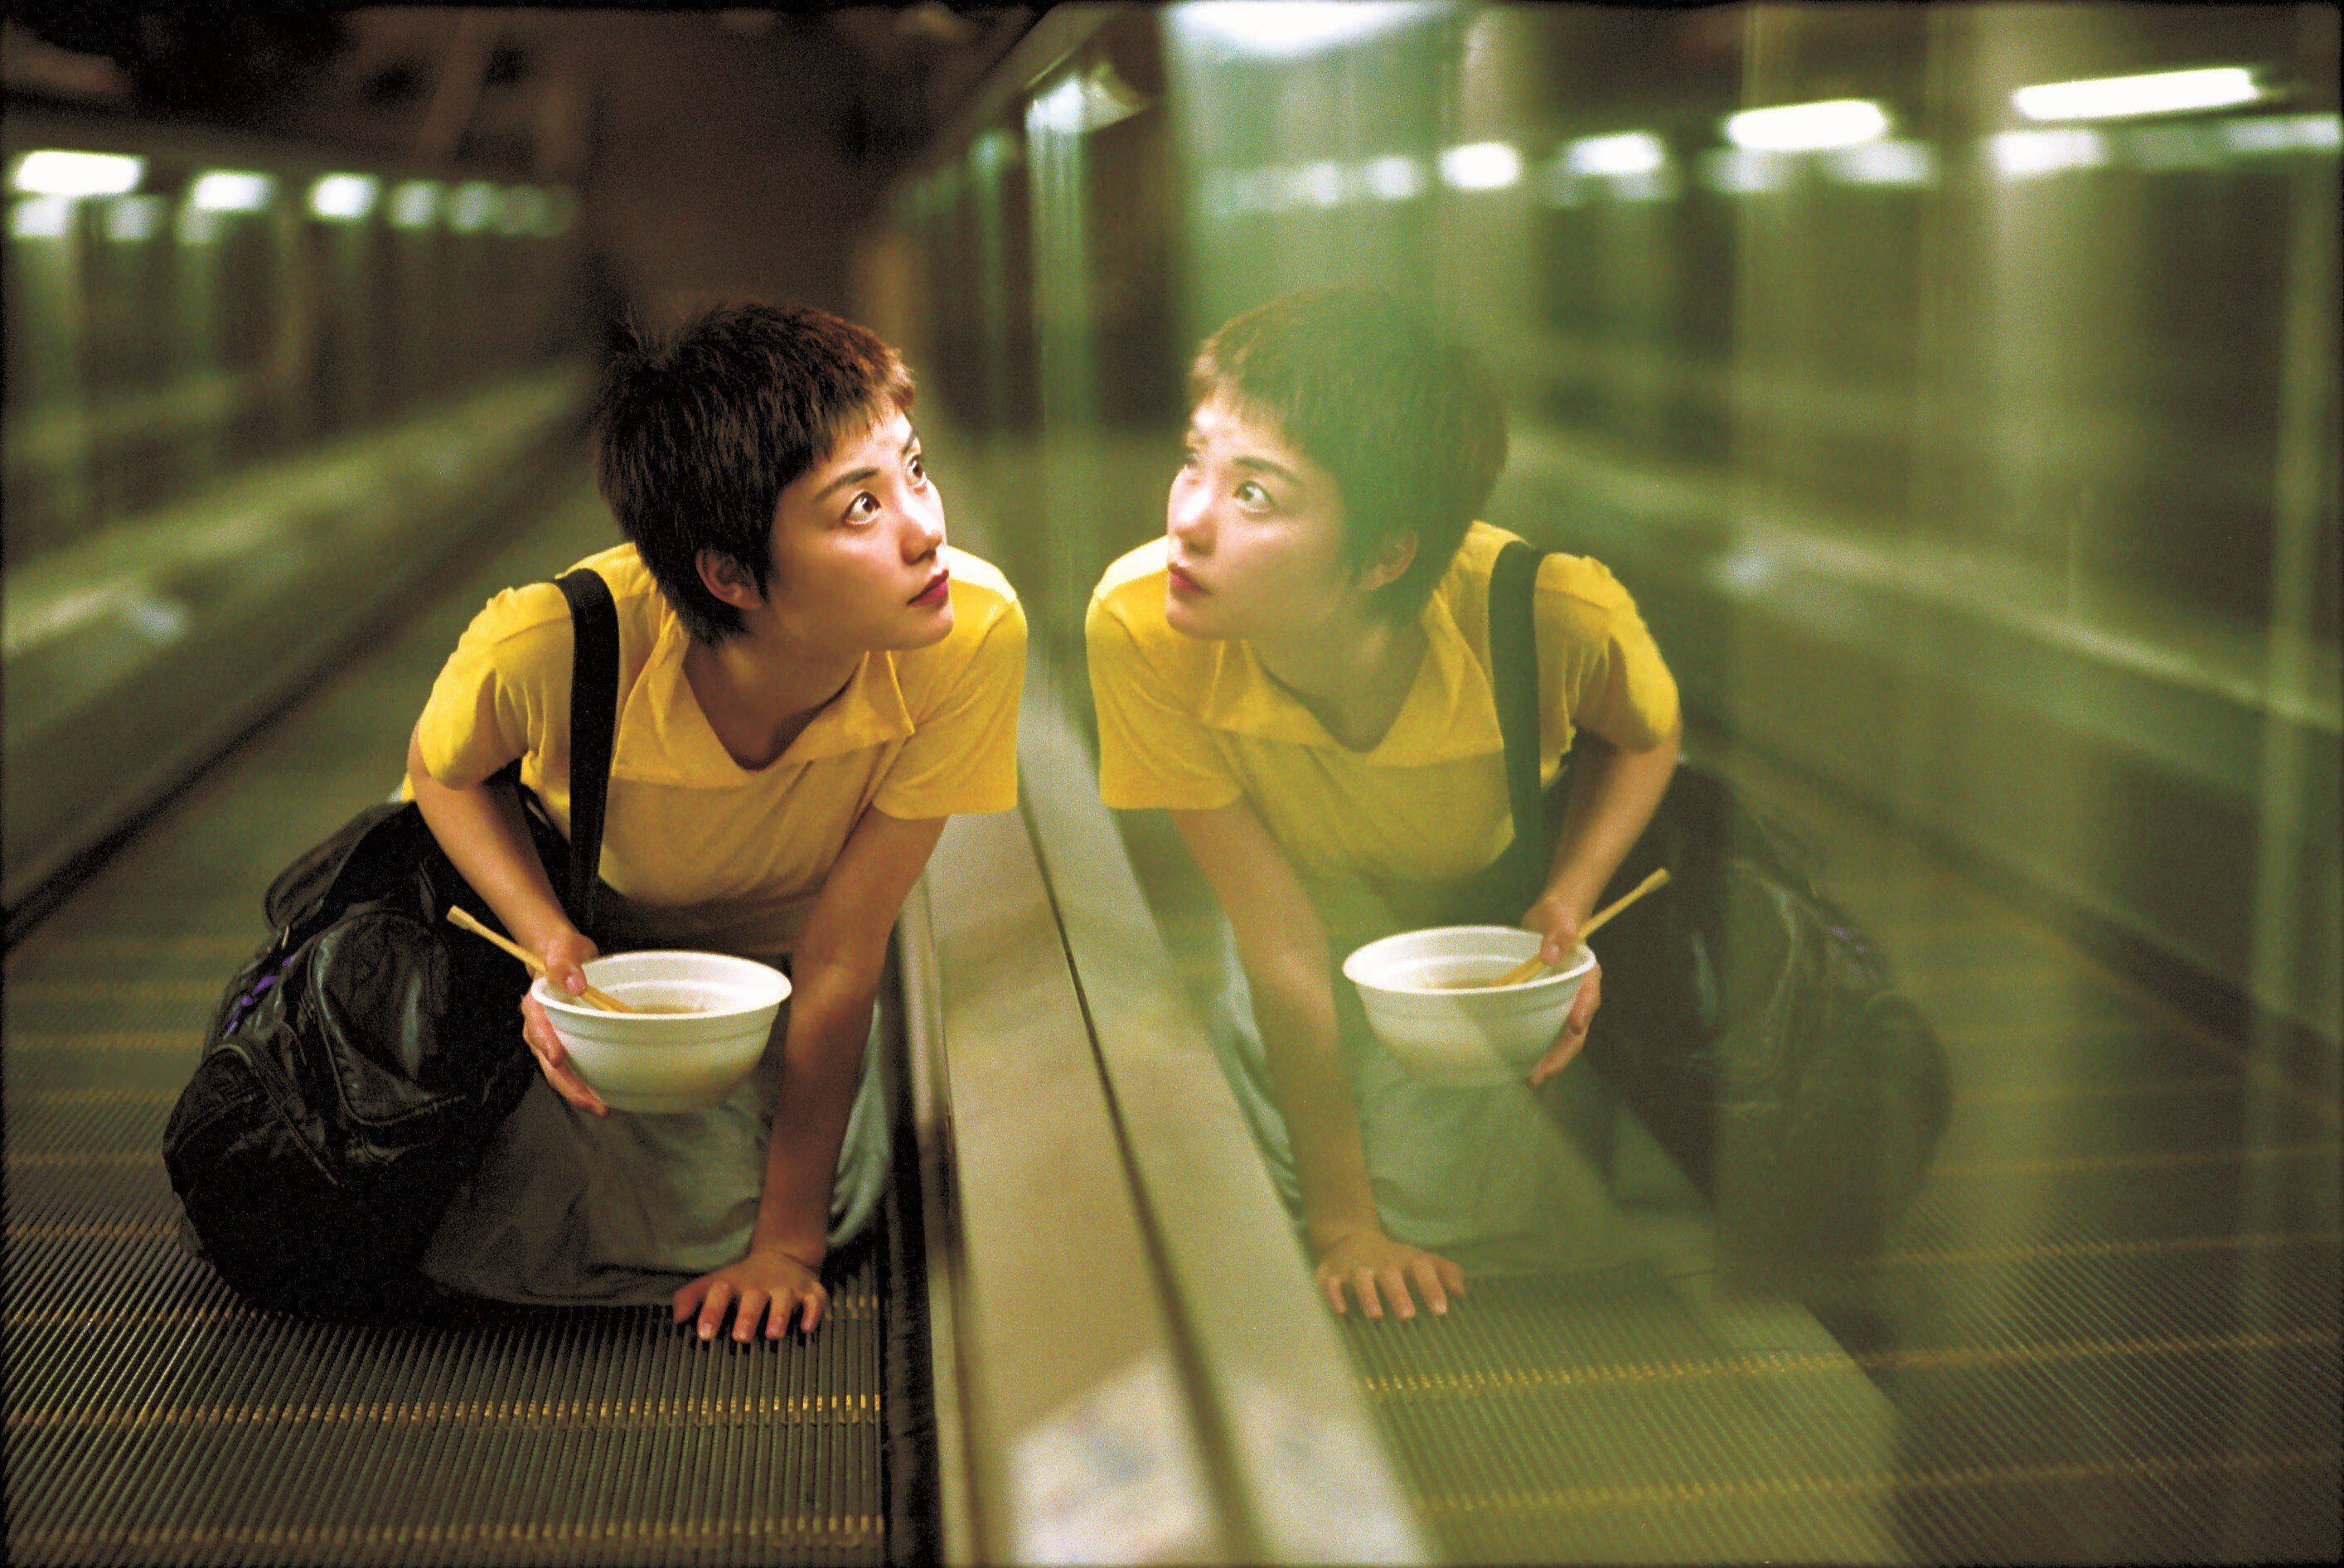 Faye Wong in Wong Kar-wai’s 1994 hit, Chungking Express, which inspired the likes of Moonlight director Barry Jenkins and the band Texas. Photo: Jet Tone Production